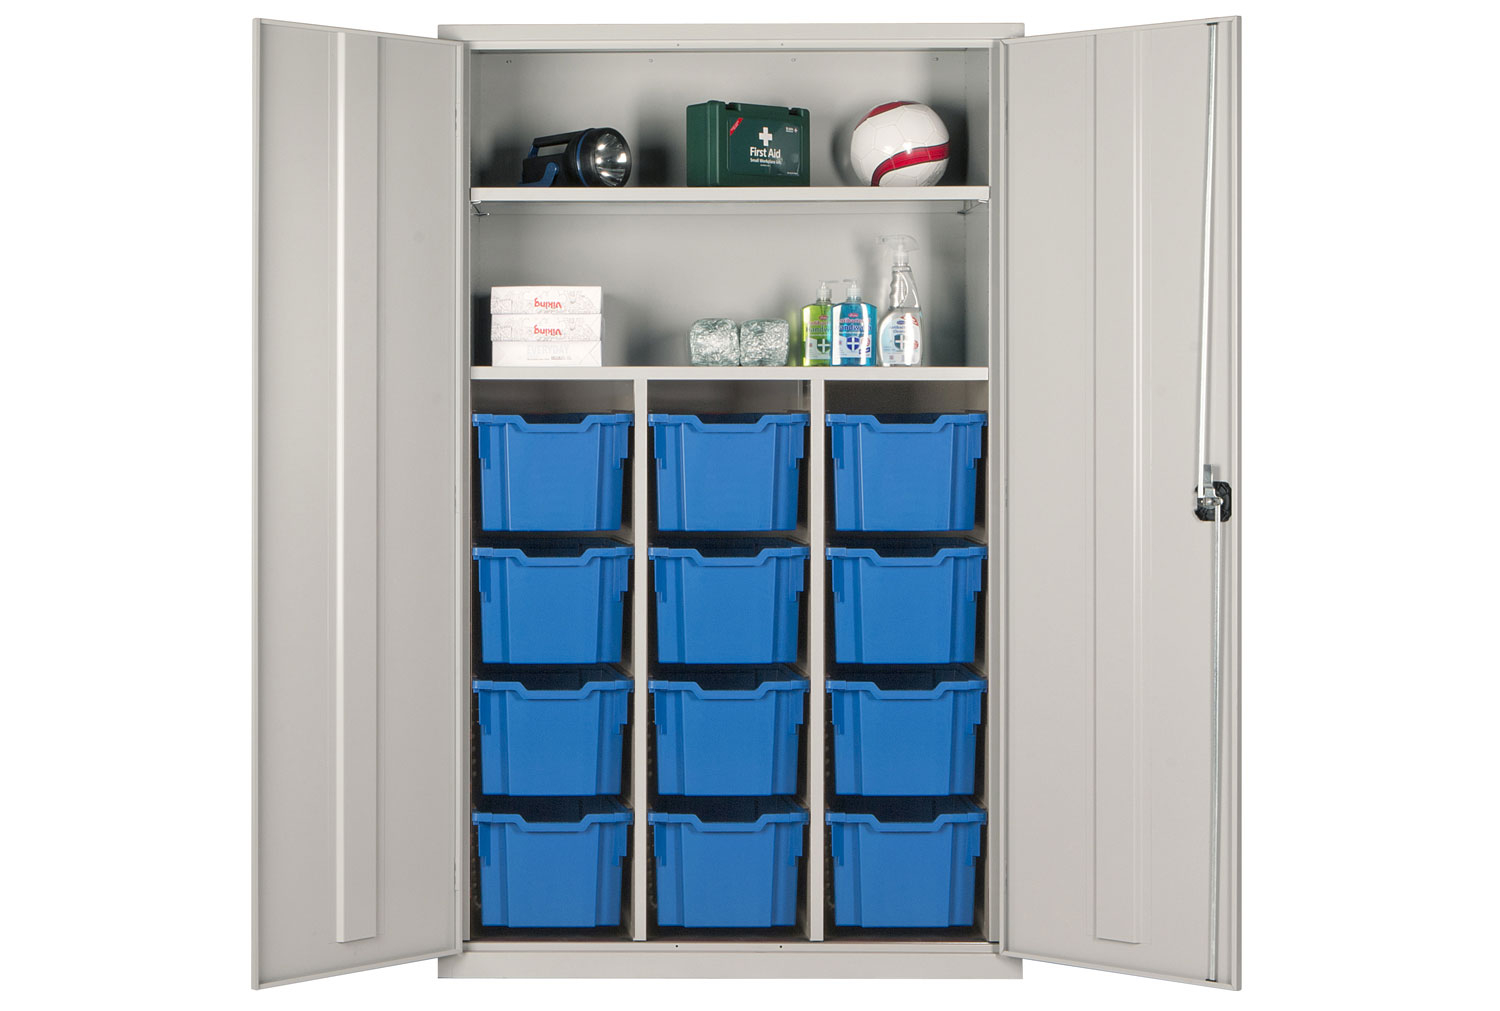 Elite Teachers Tray Storage Office Cupboards With 12 Extra Deep Trays, Black With Blue Trays